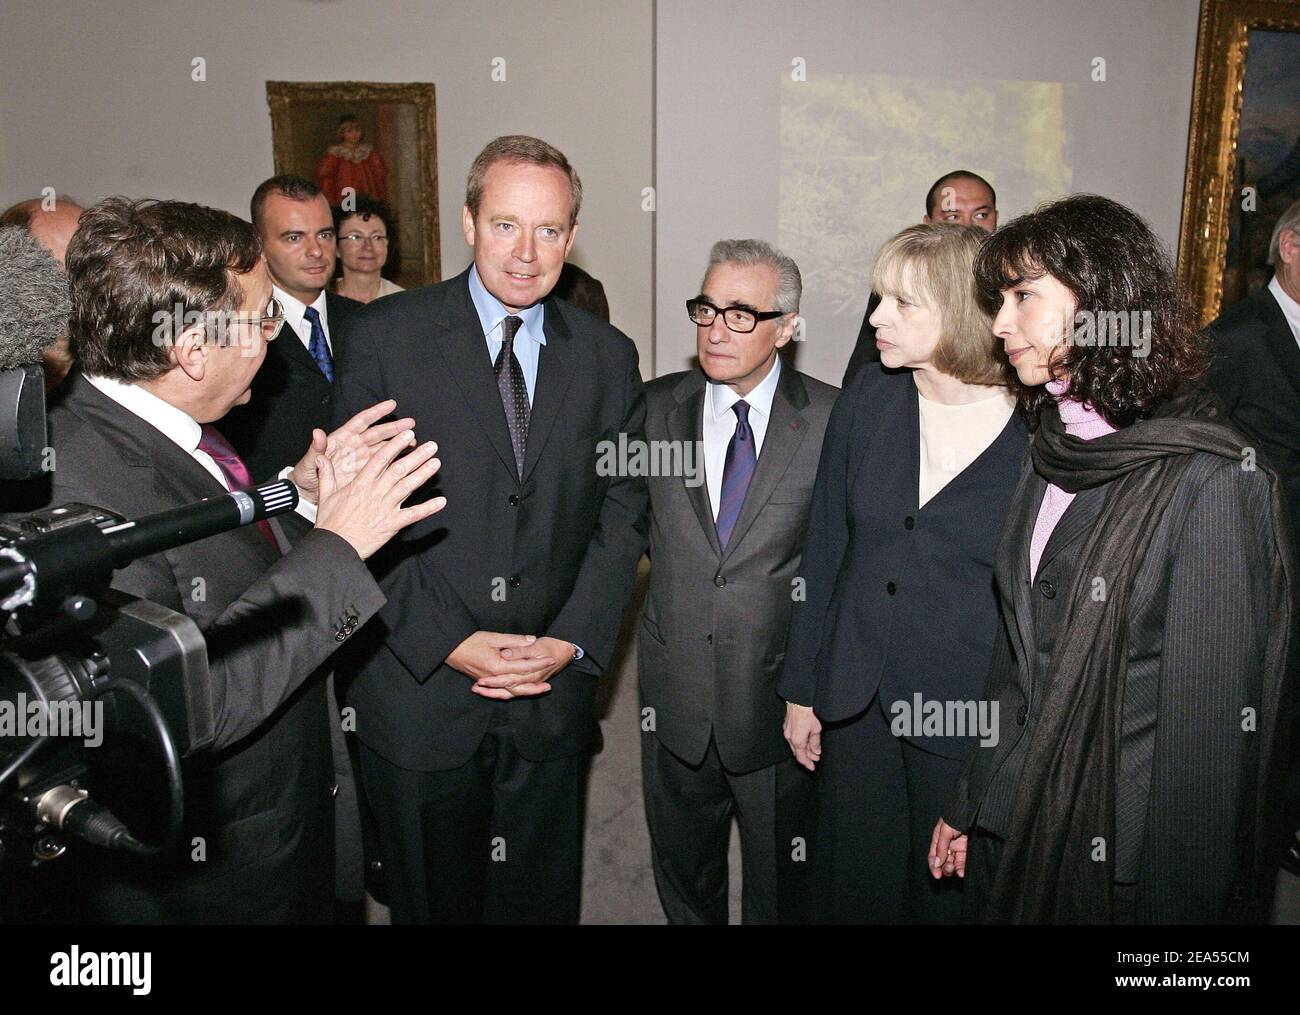 Director of Cinematheque Serge Toubiana, French culture minister Renaud Donnedieu de Vabres, US film director Martin Scorsese and his wife Helen Morris, and Sophie Renoir attends the inauguration of the new Cinematheque Francaise in Paris, France designed by US architect Frank O. Gehry, on september 26, 2005. Photo by Laurent Zabulon/ABACAPRESS.COM Stock Photo